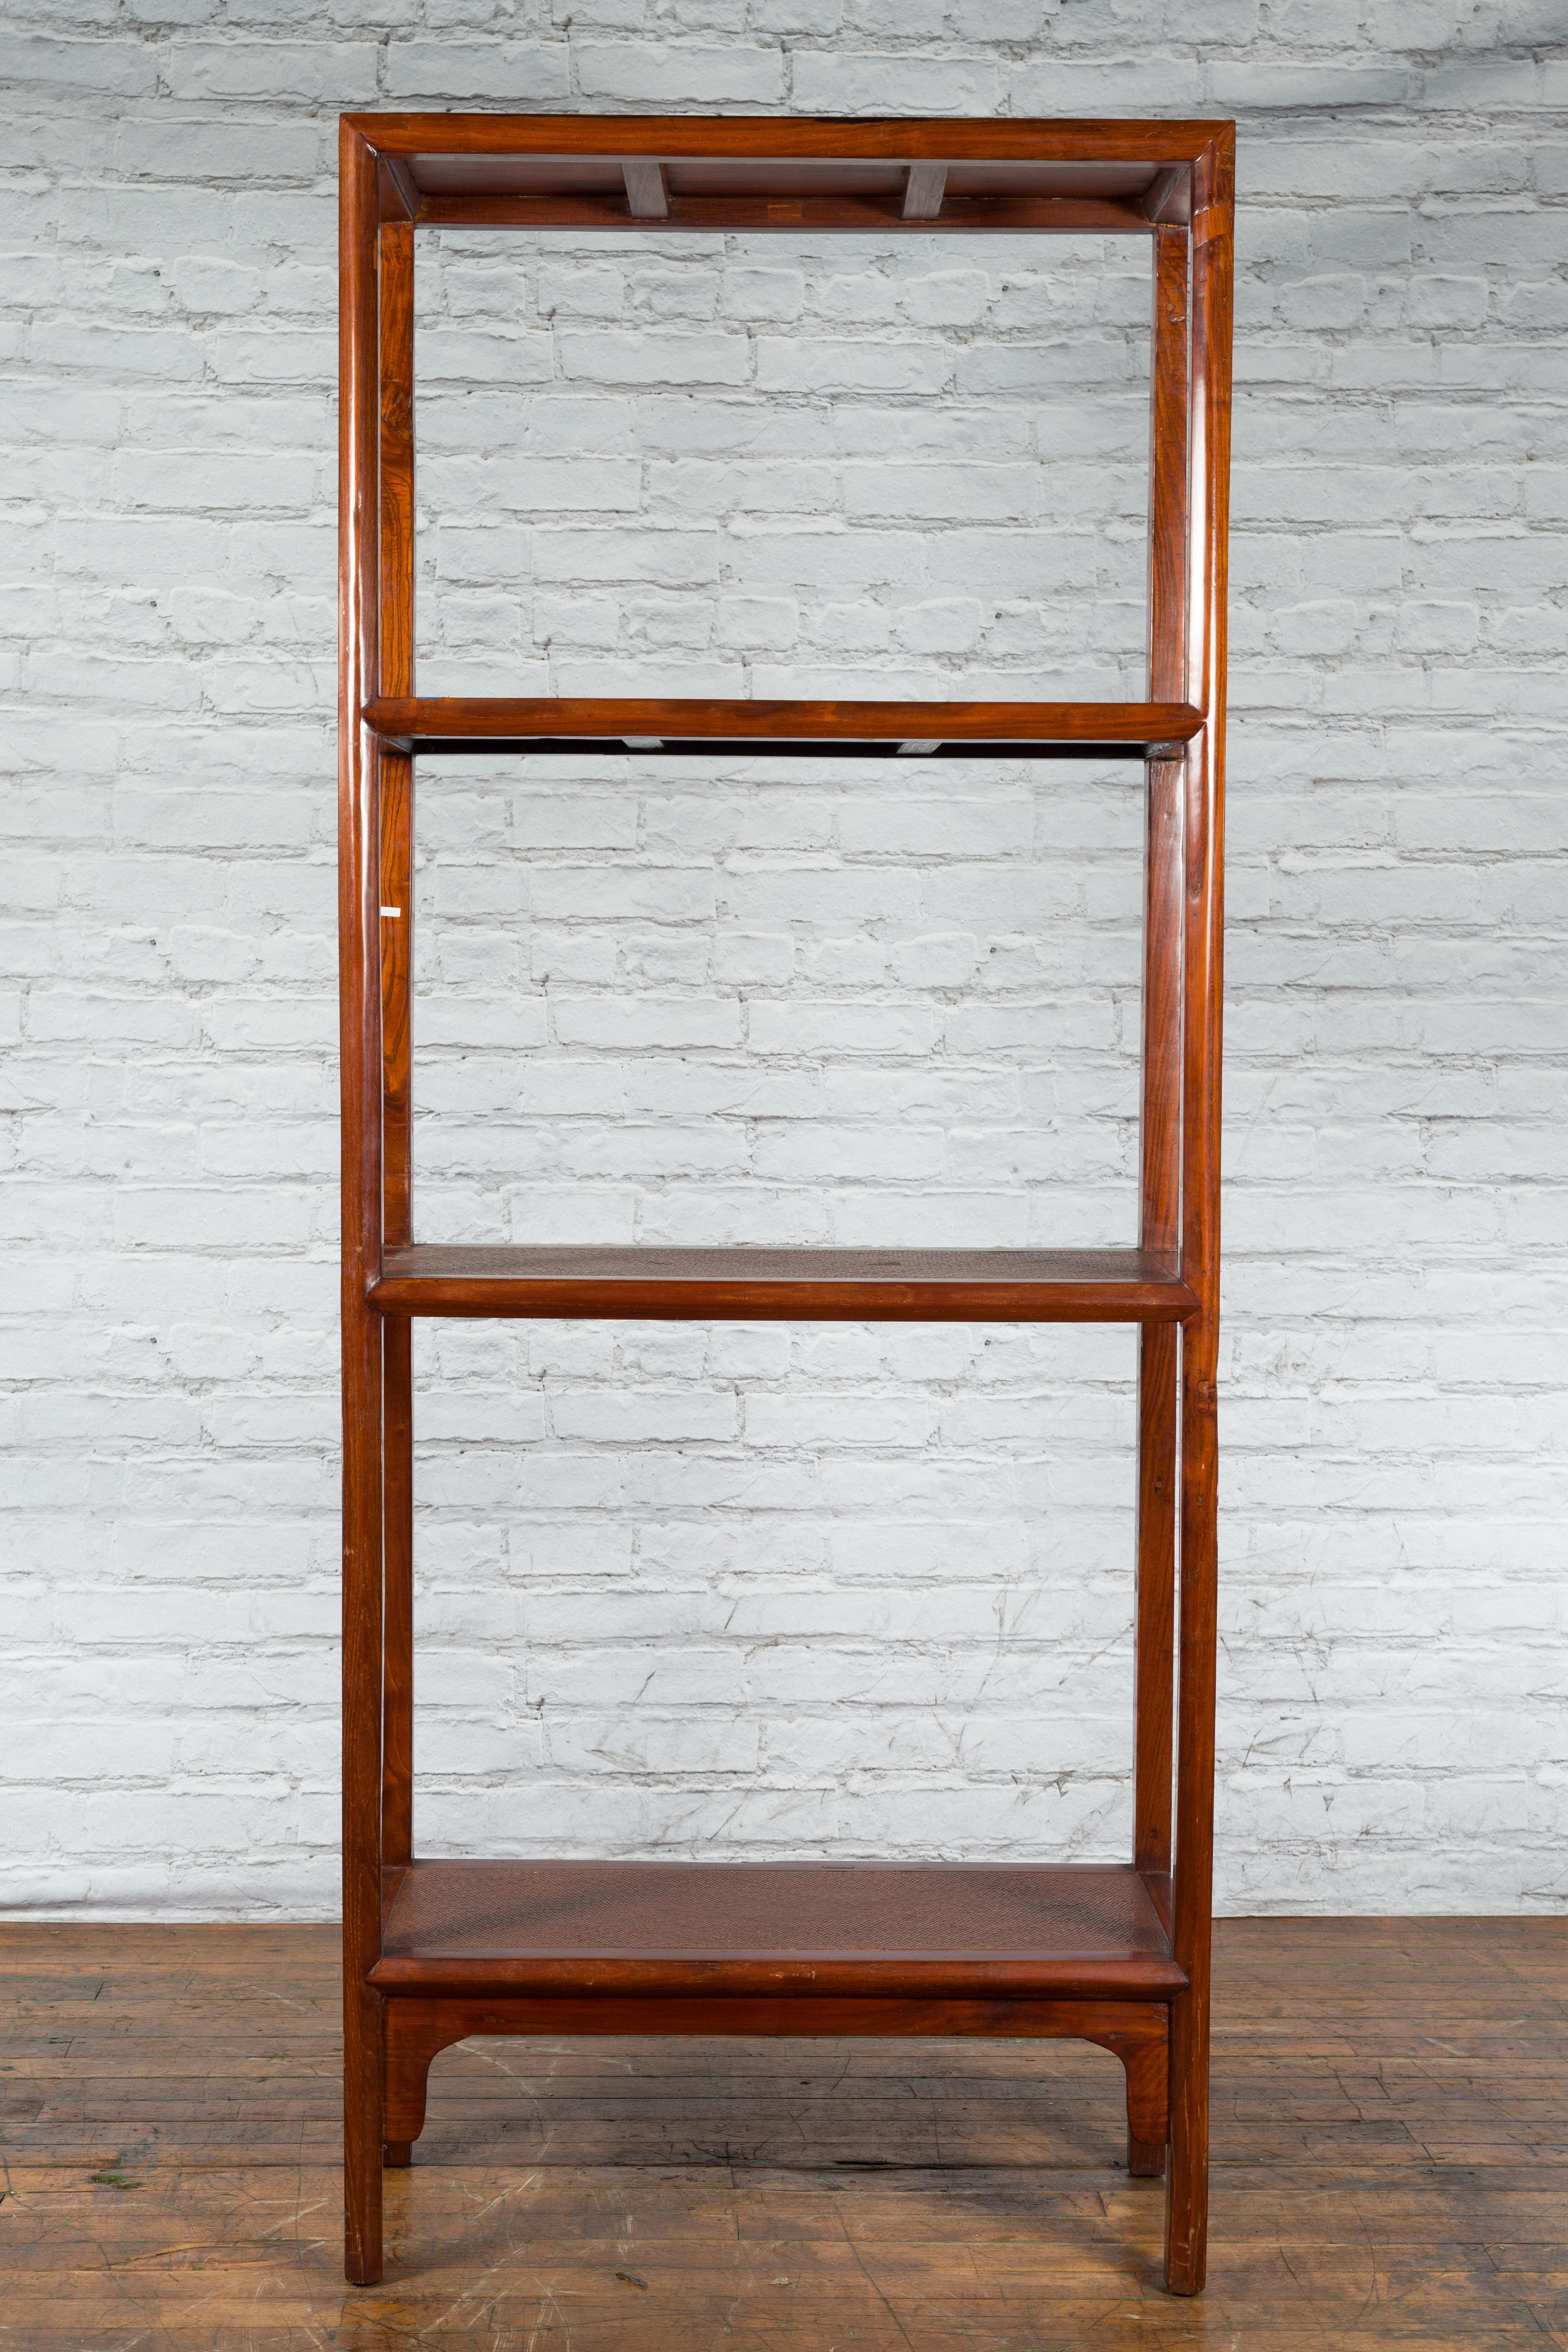 Chinese Early 20th Century Wooden Bookcase with Woven Rattan Shelves and Apron For Sale 5